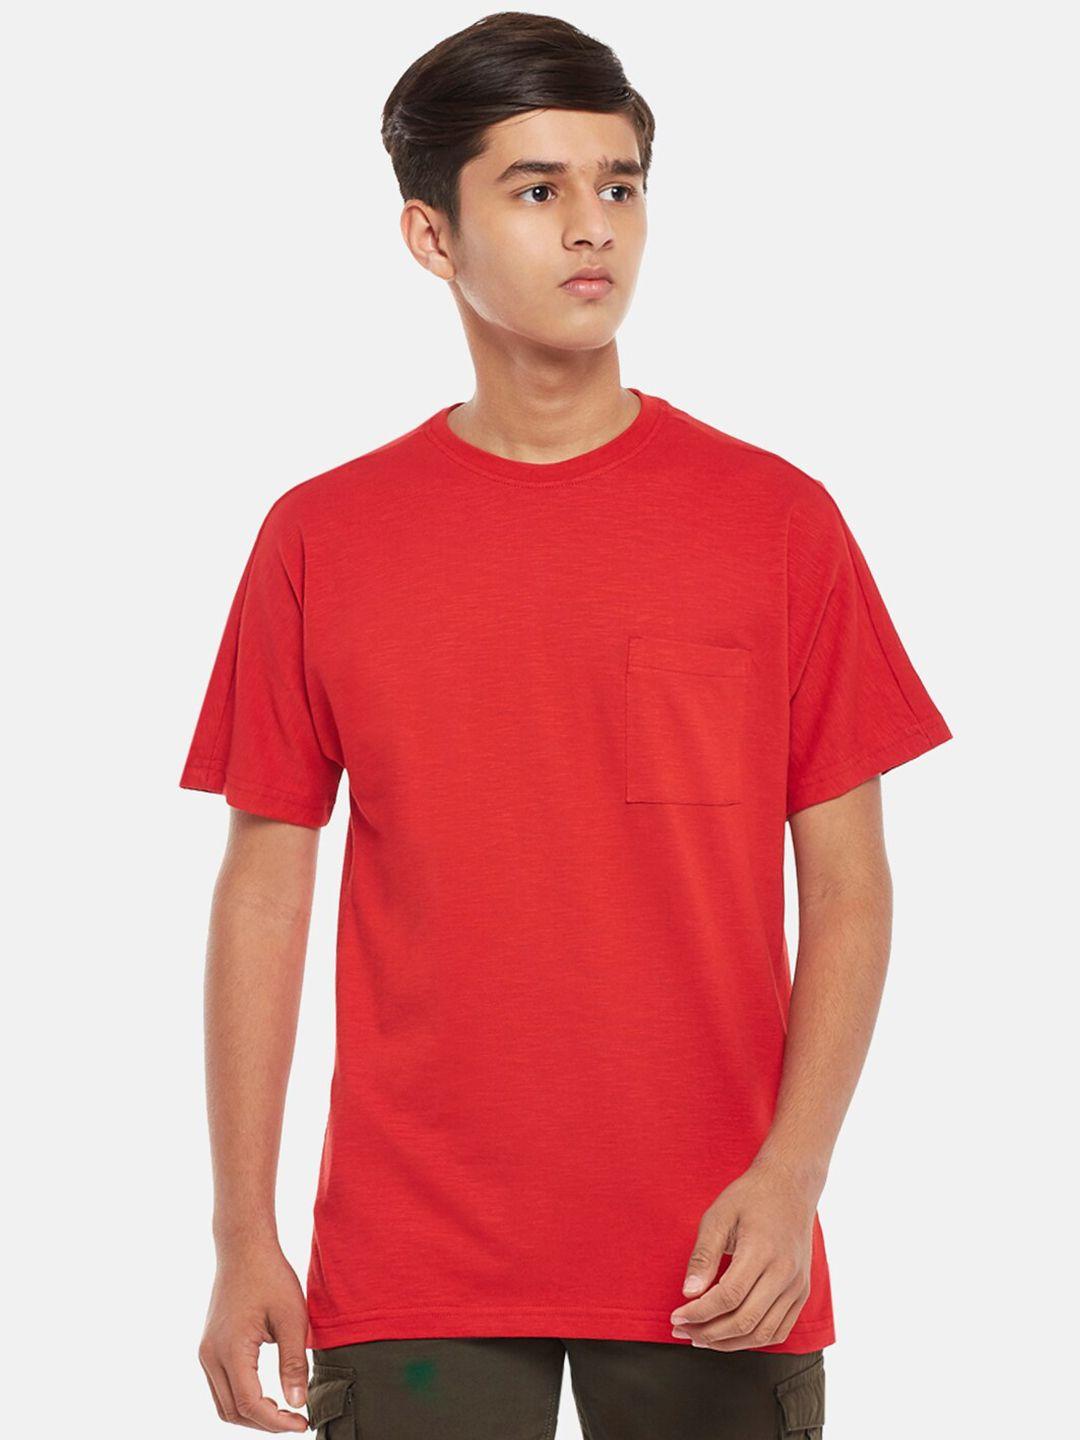 coolsters by pantaloons kids boys red t-shirt